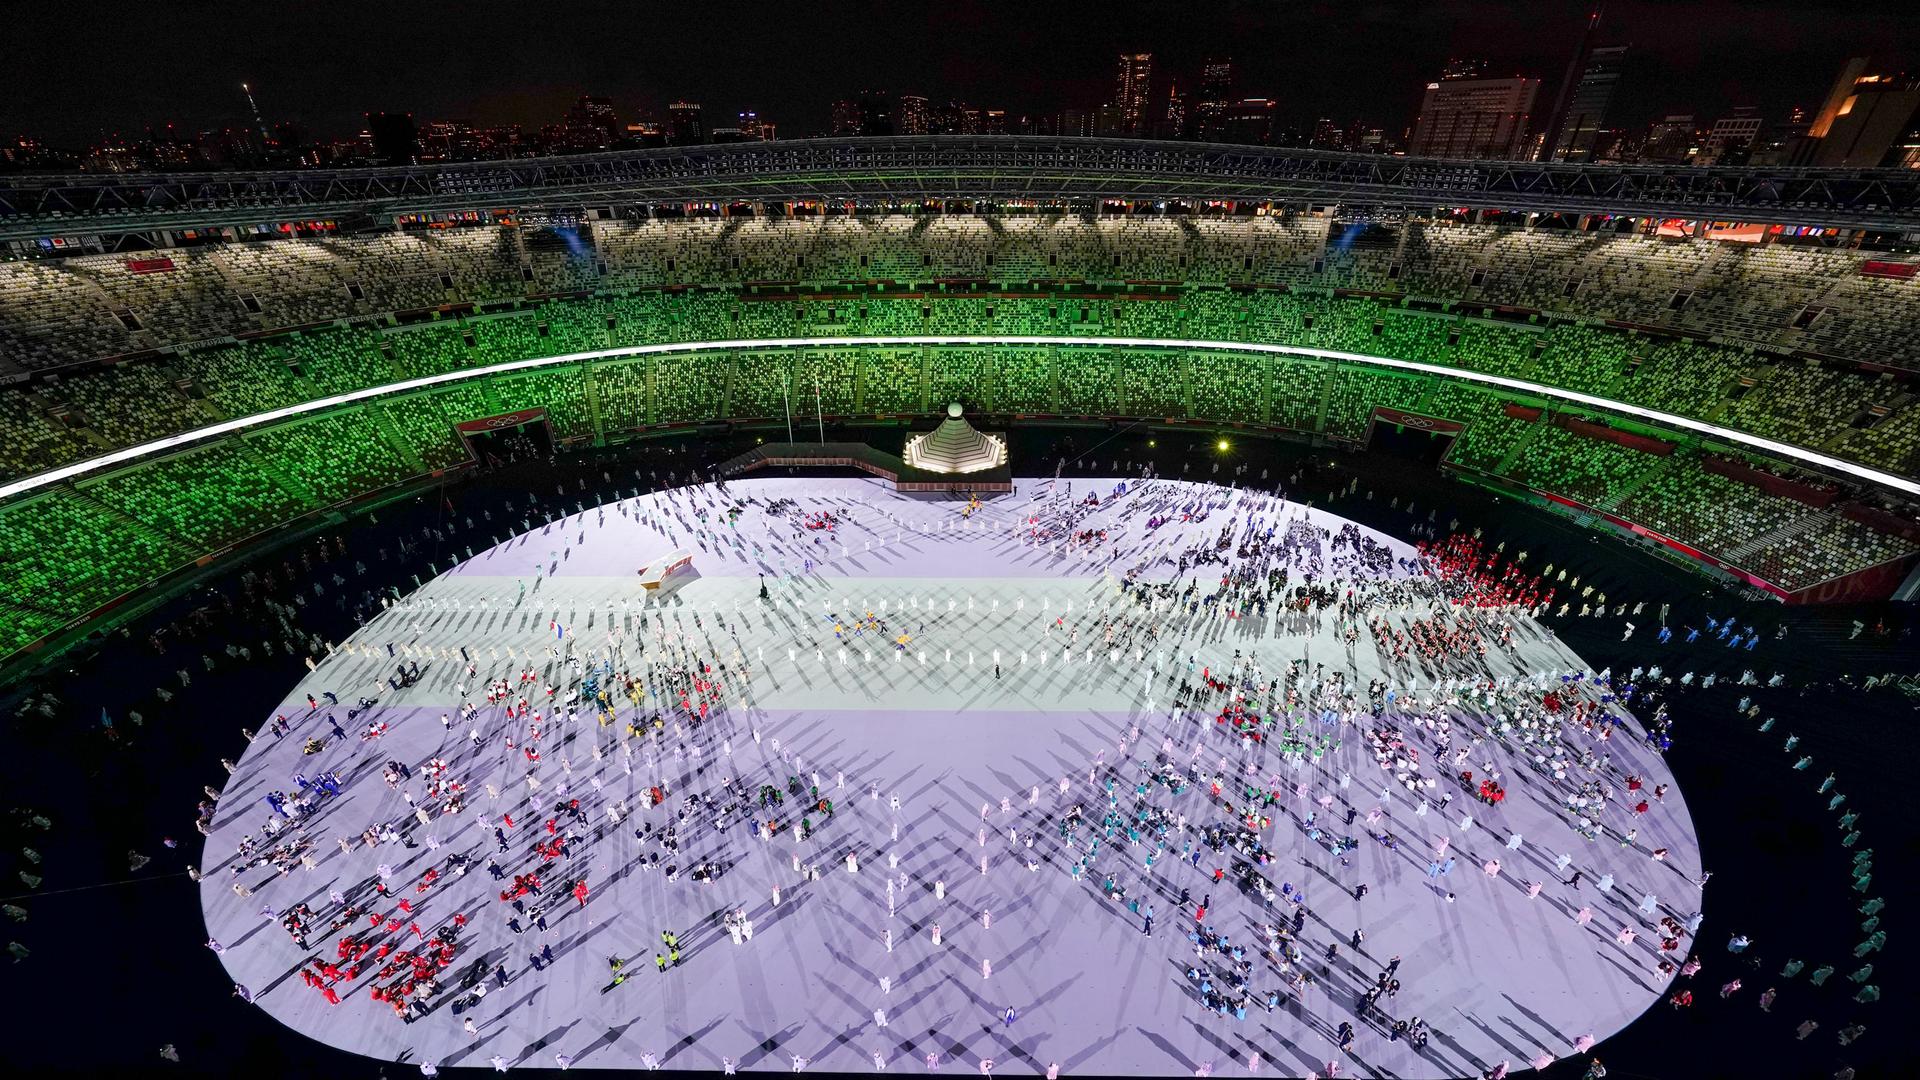 Olympic athletes are shown on the white floor of a large oval stadium shown at night with colorful lighting and mostly empty seats.